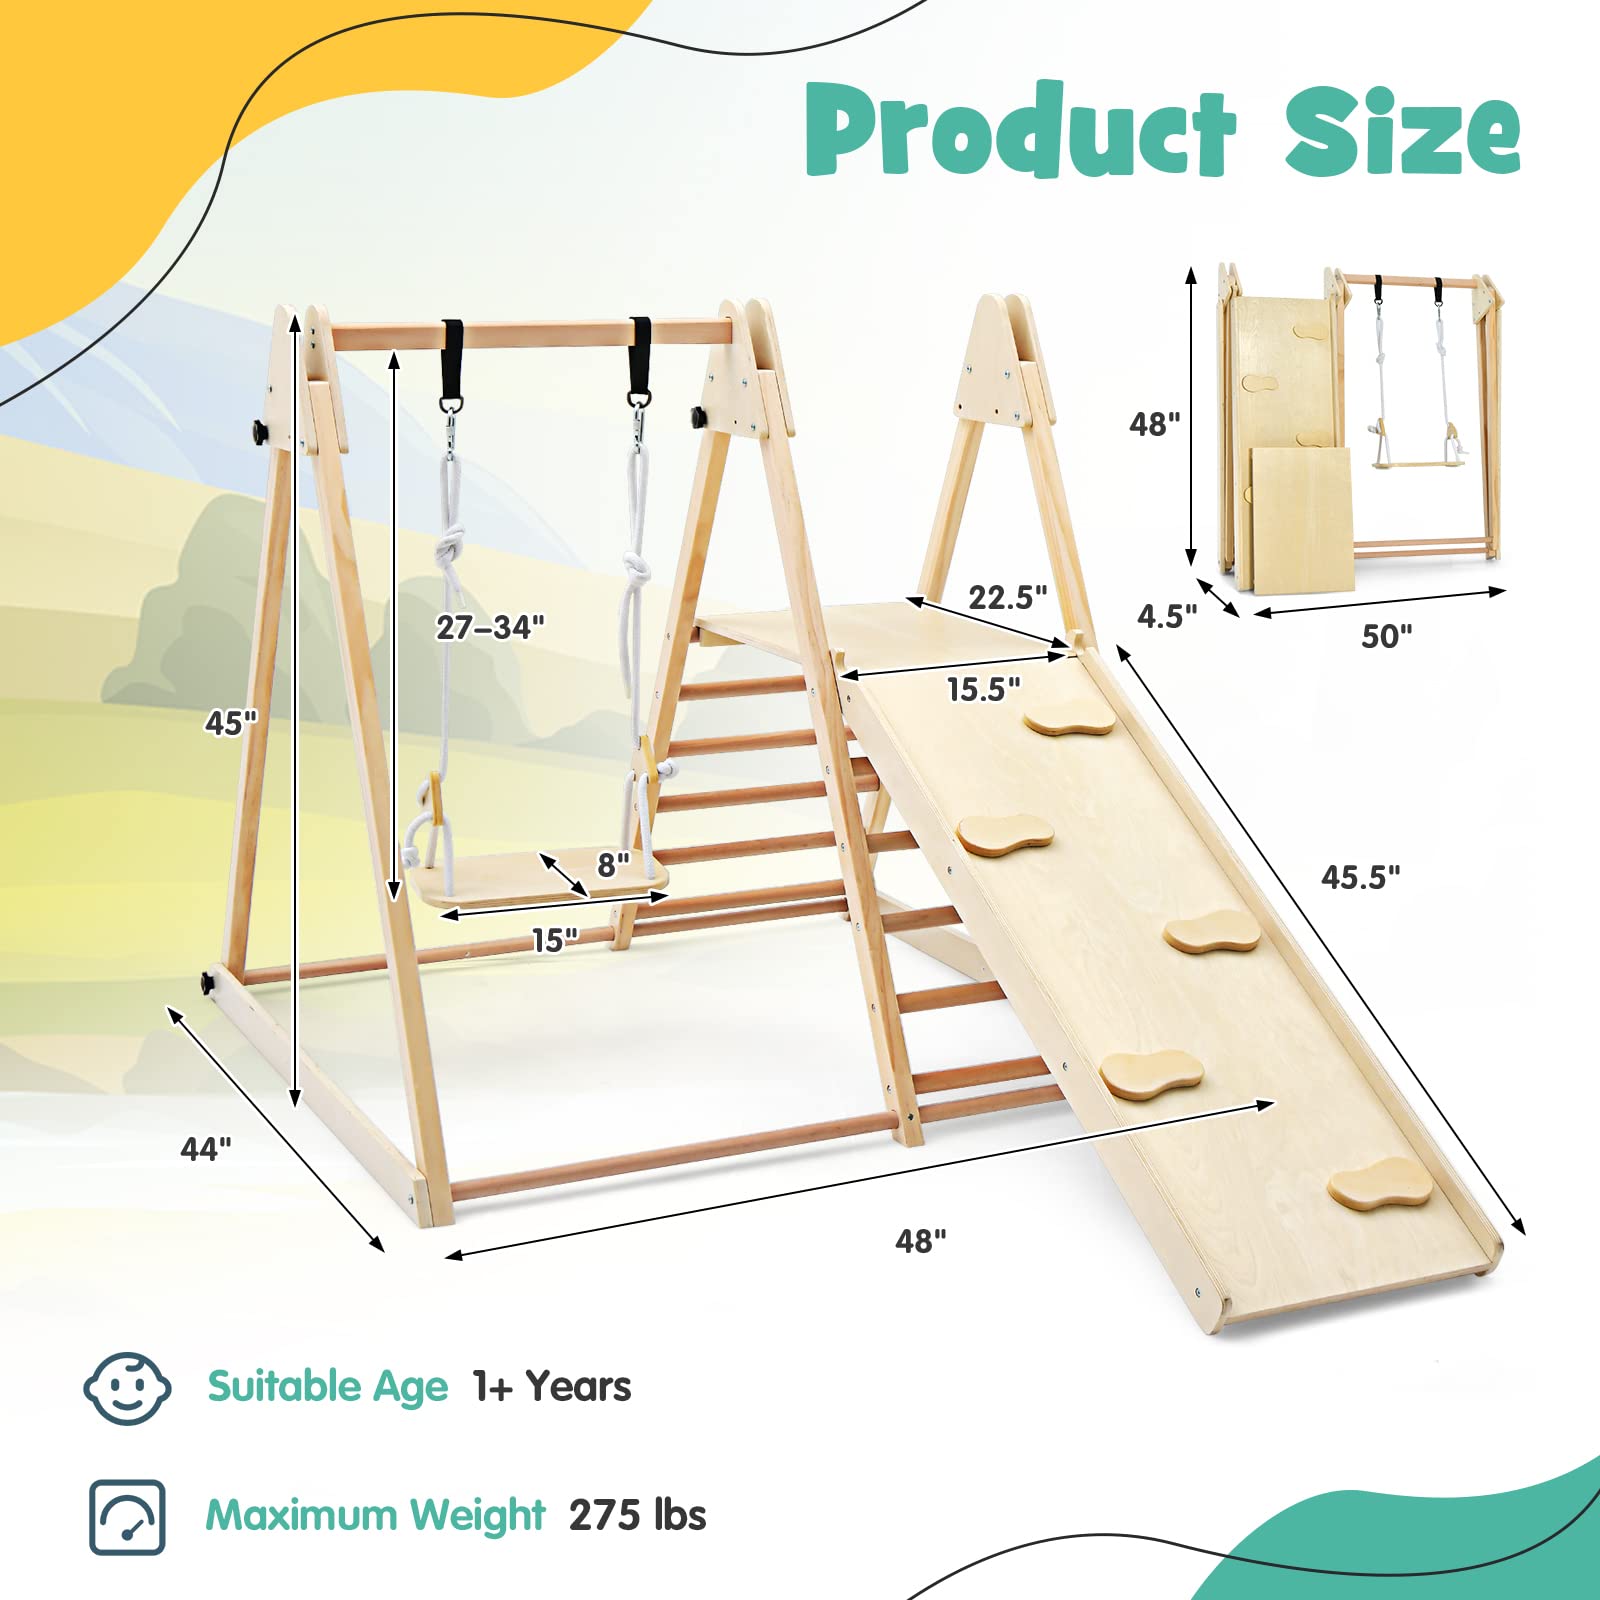 OLAKIDS Toddlers Triangle Climbing Set, 4 in 1 Foldable Kids Wood Mont